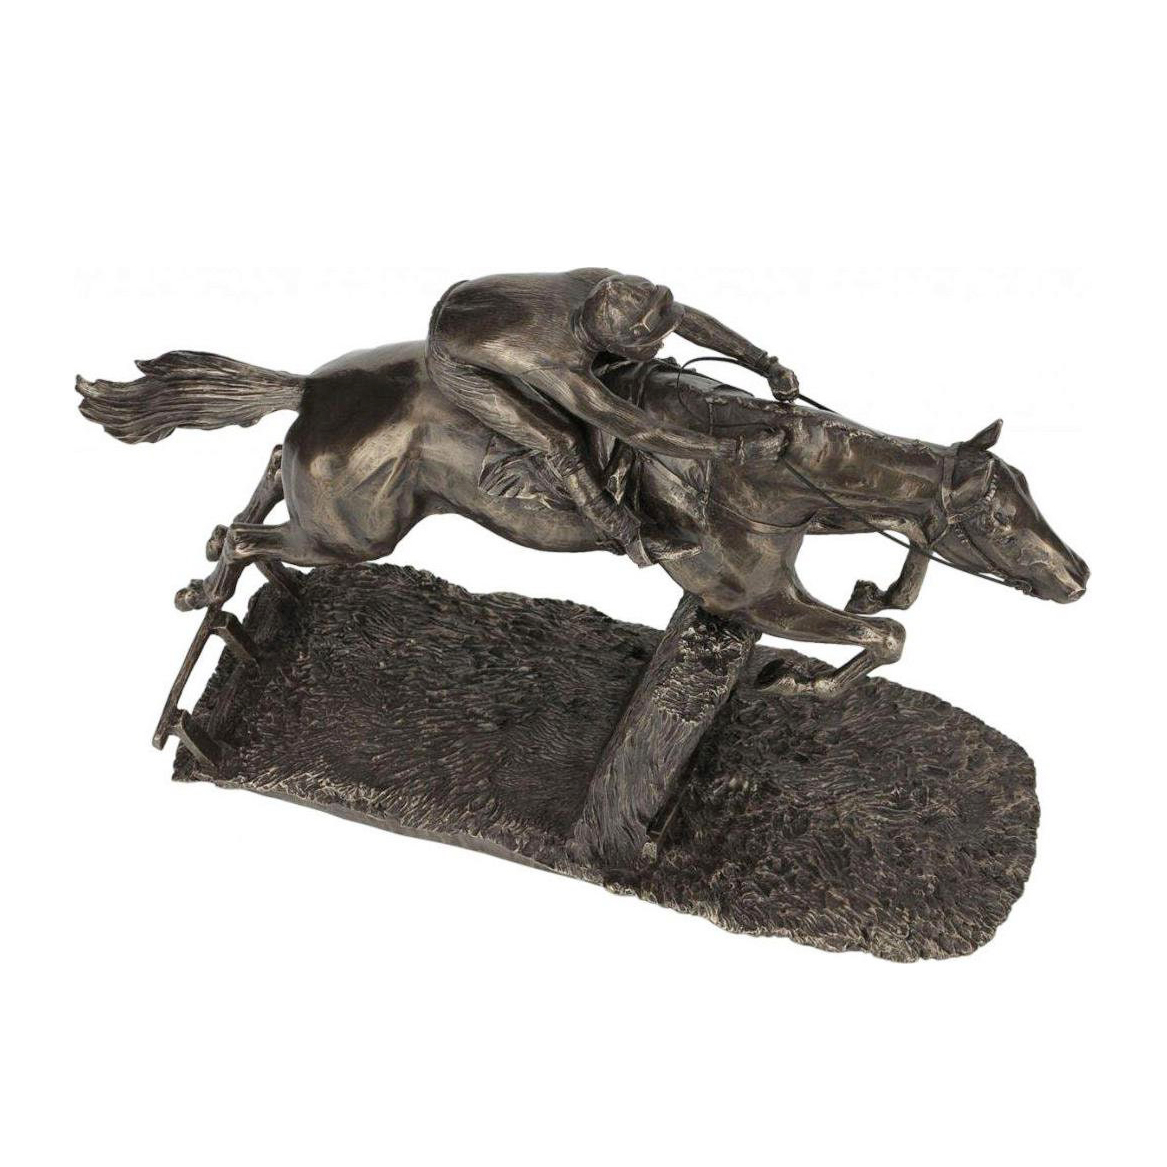 Horse Racing Statues for Sale